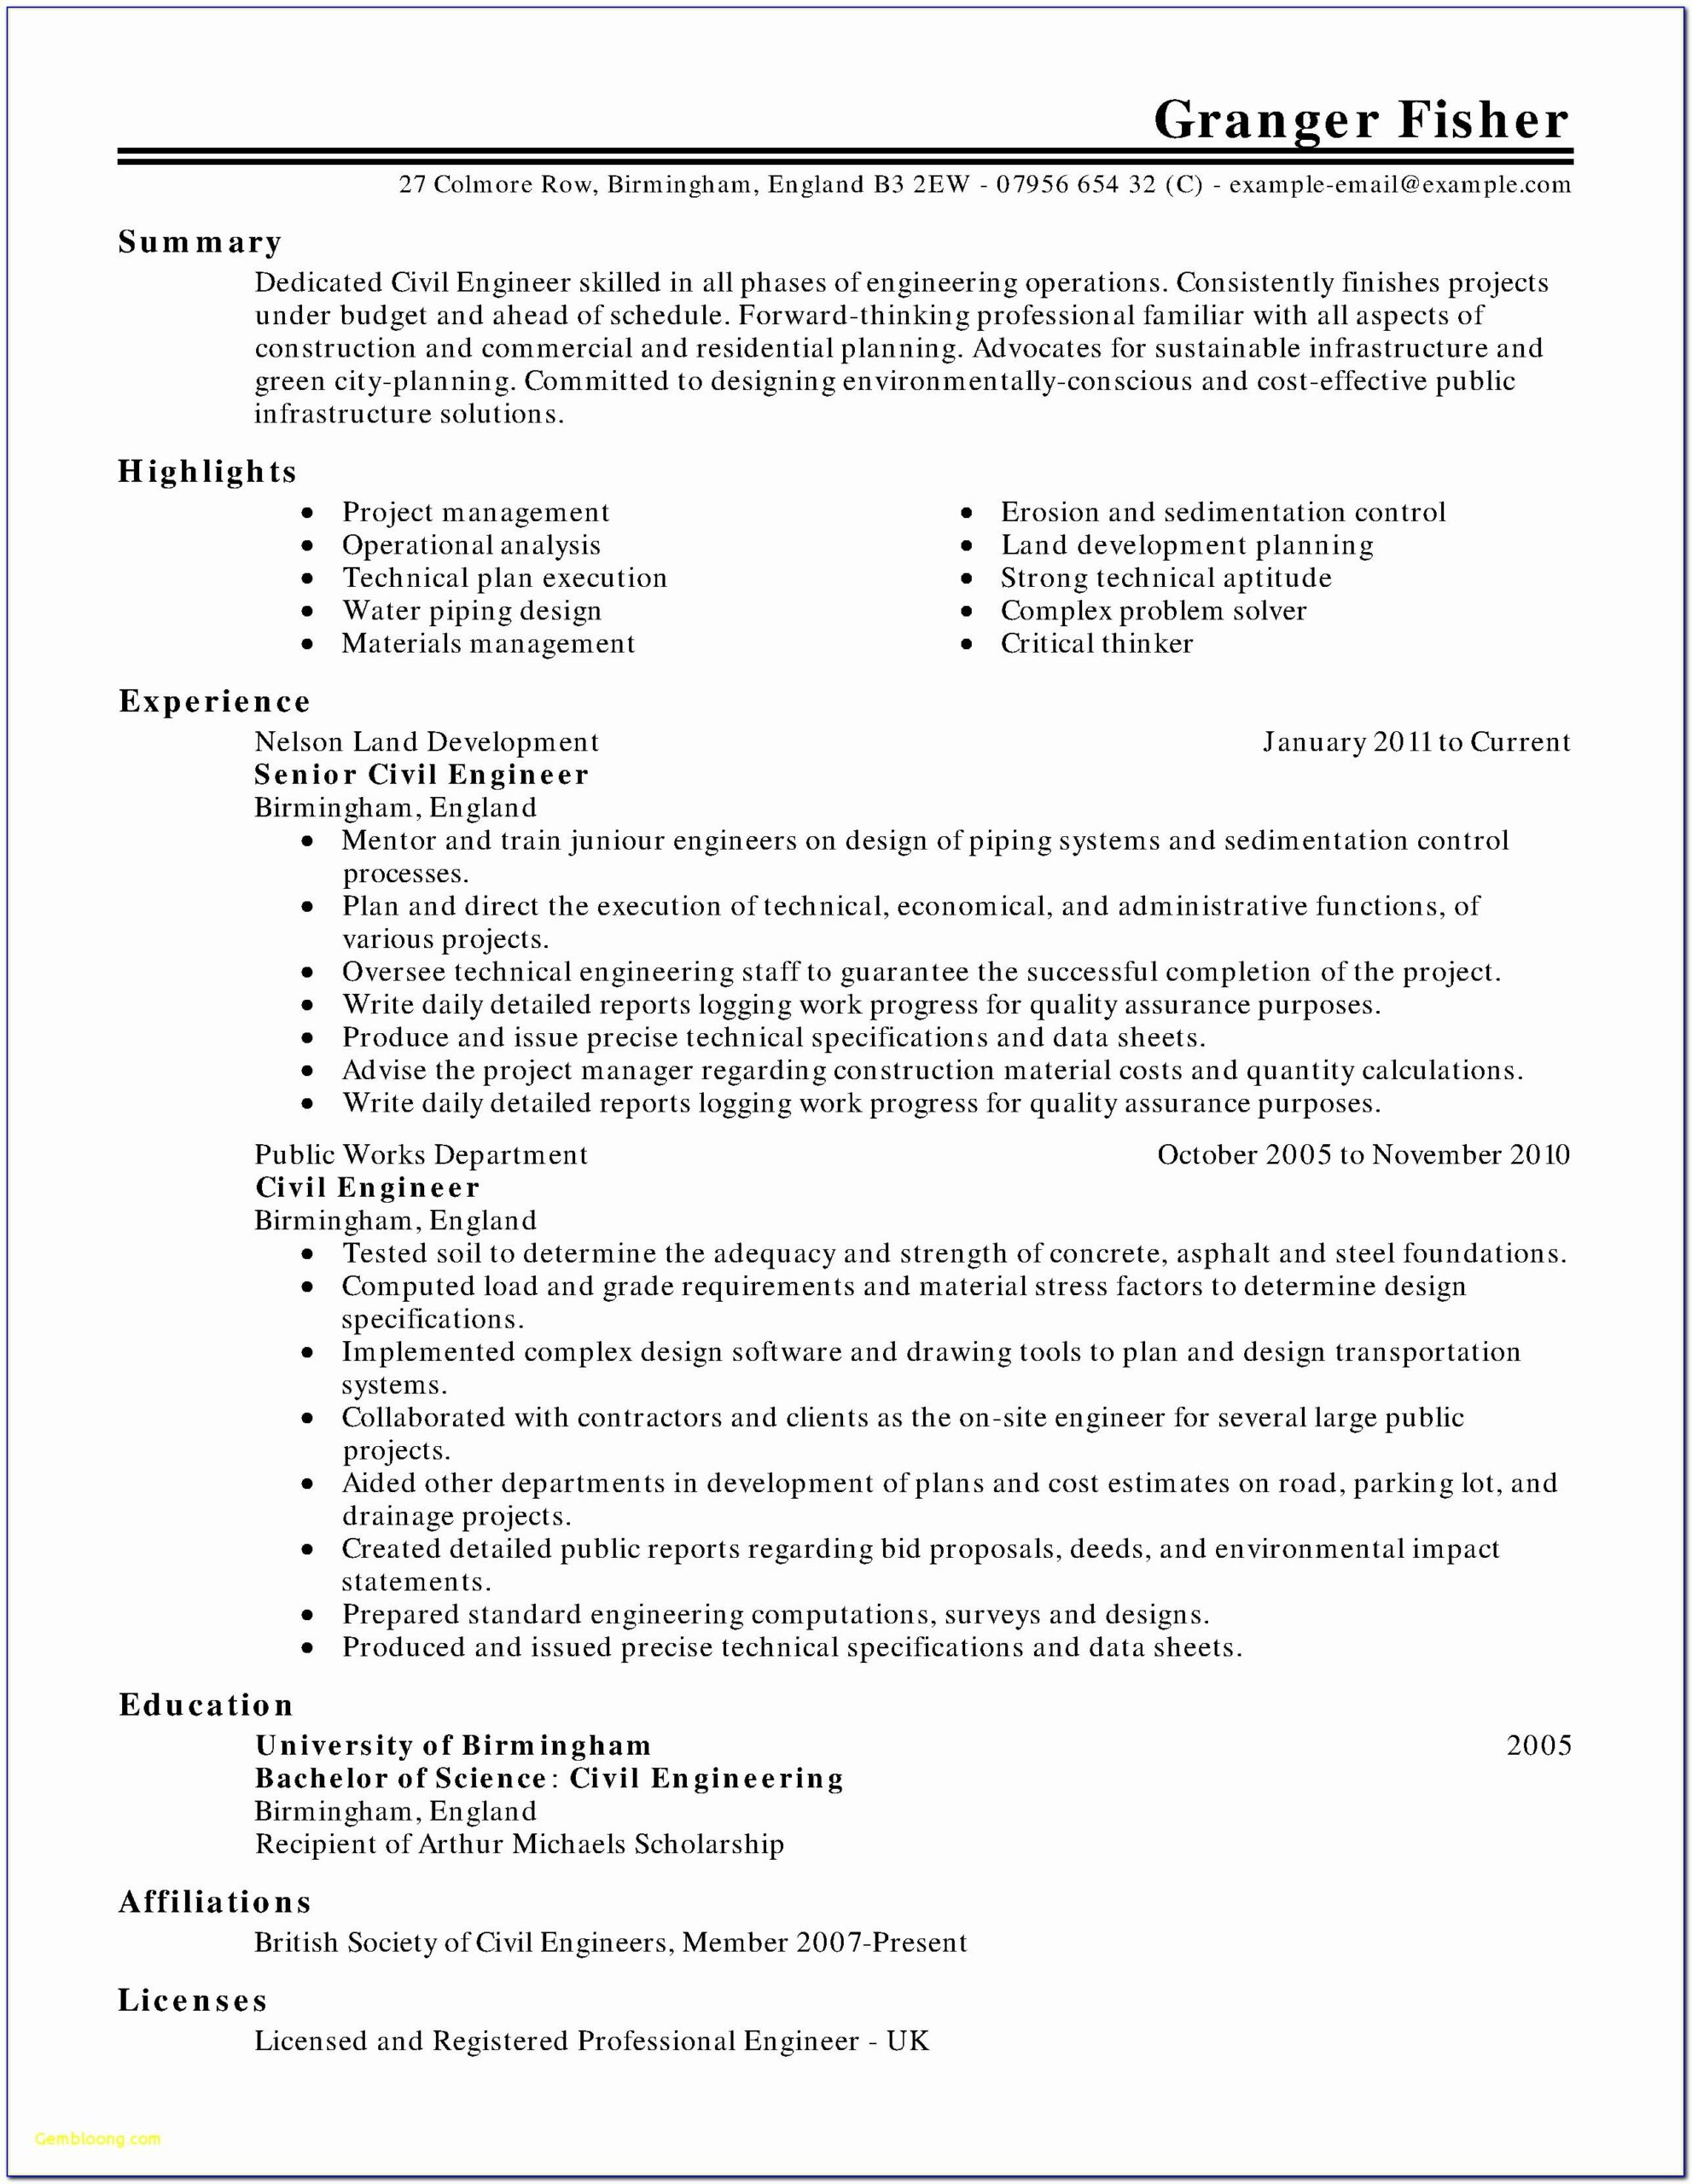 Download Free Resume Templates For Mac Pages